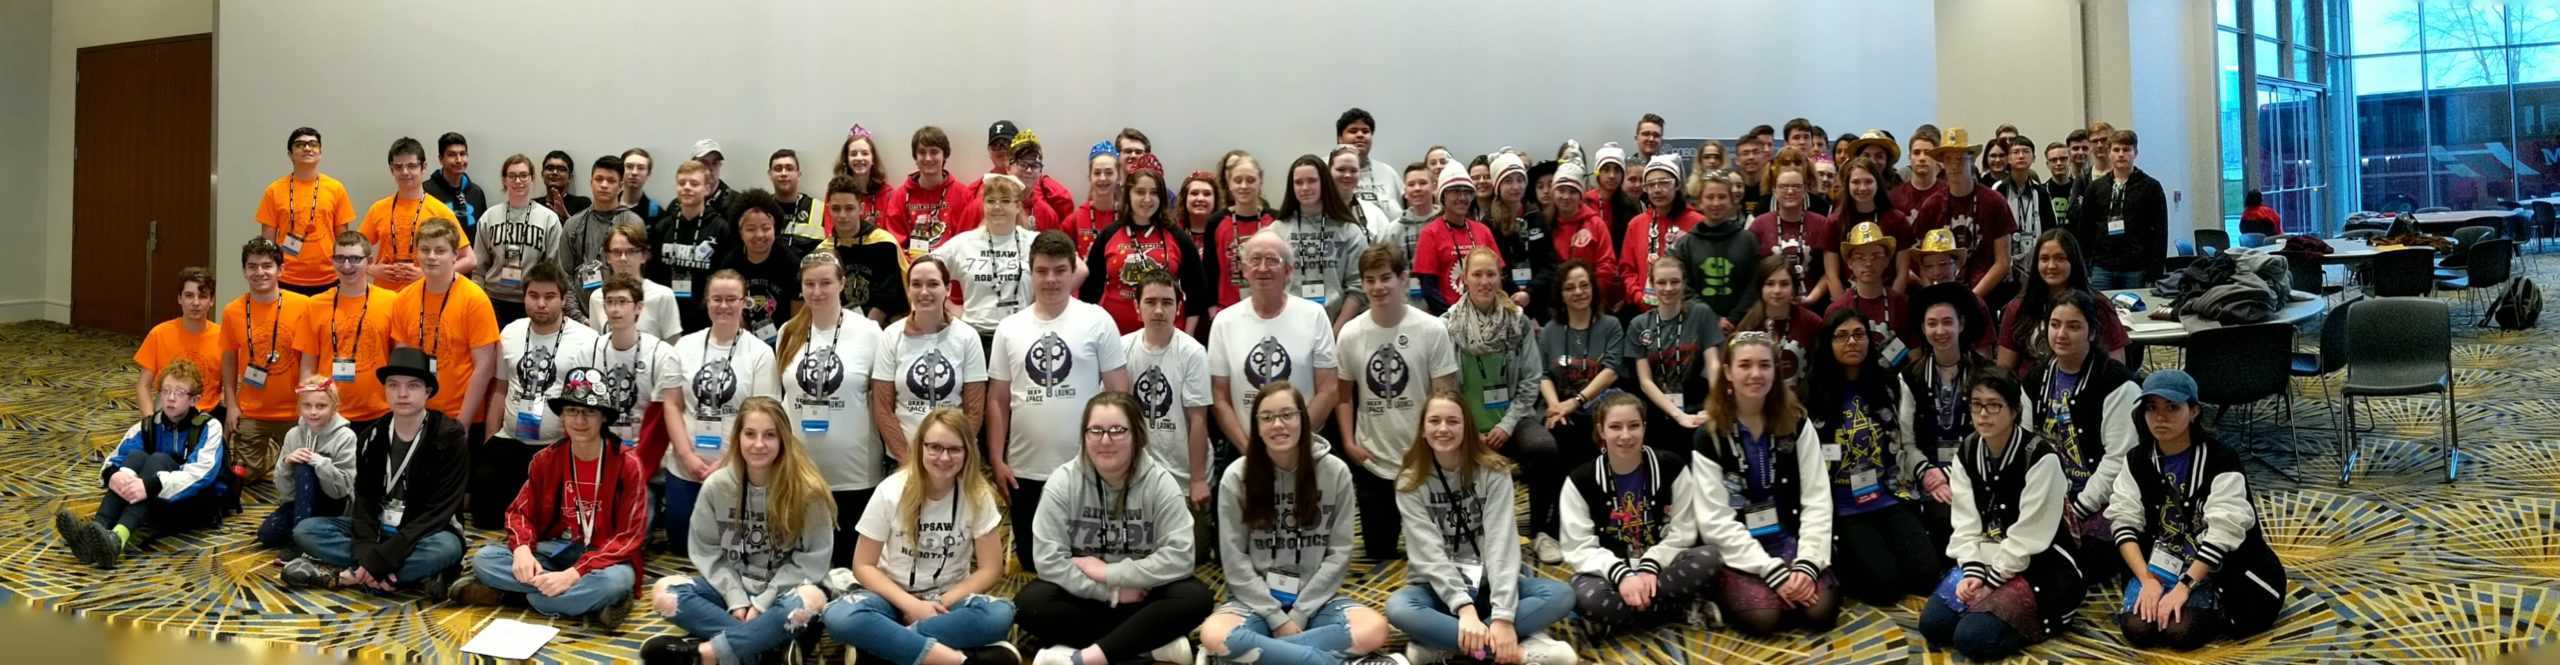 Group photo of robotics teams in uniforms at 2019 FIRST Detroit Championship All Rookie Meet and Greet